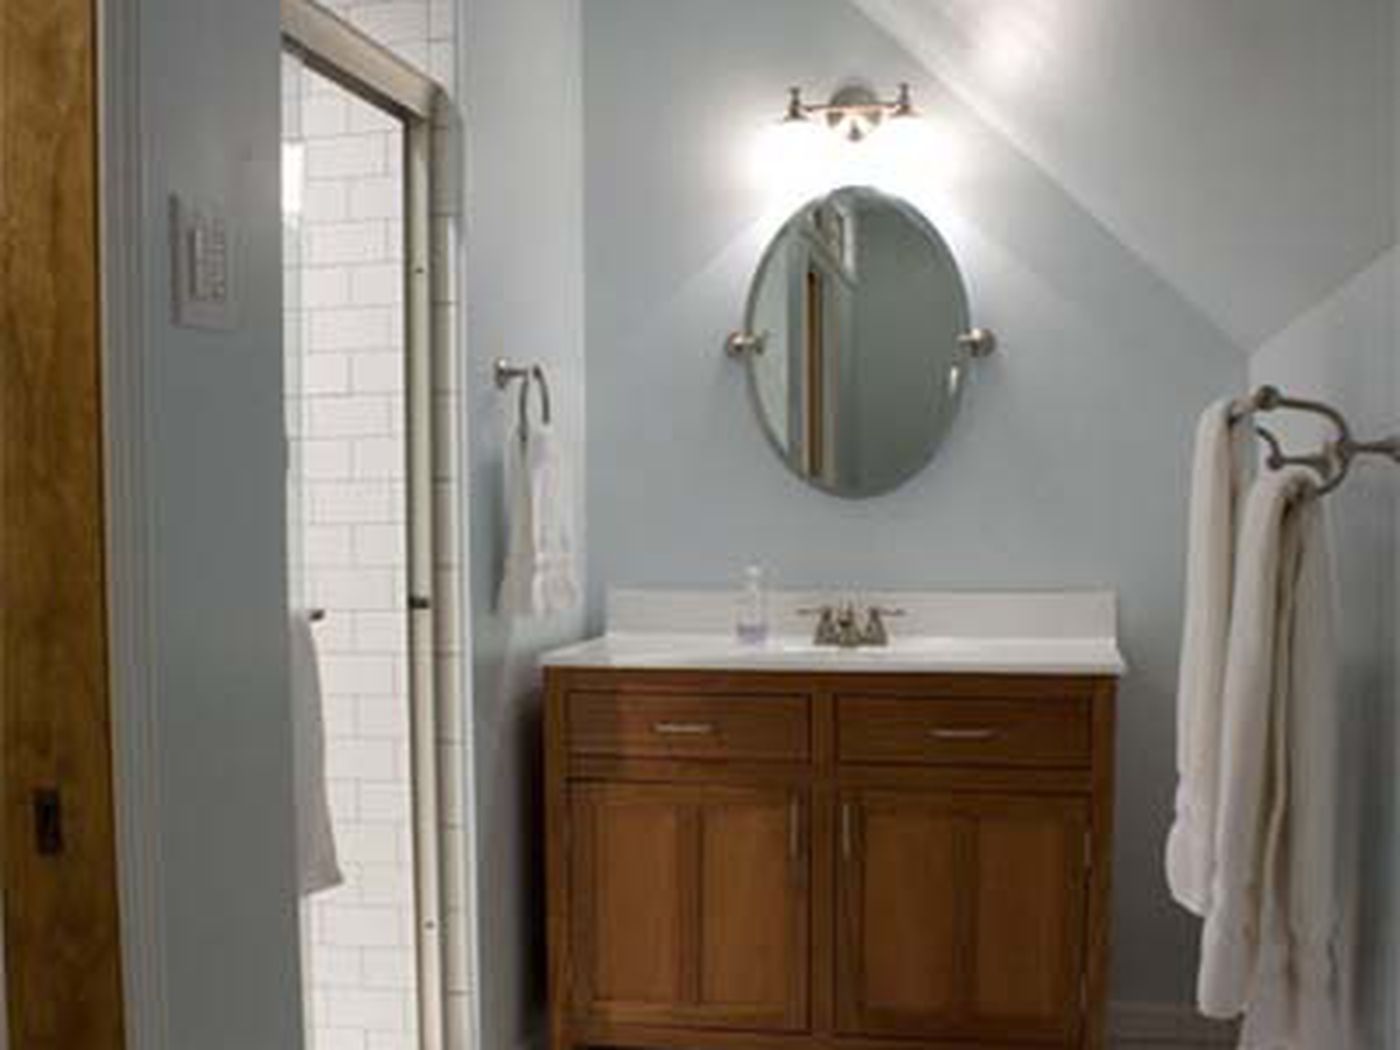 18 Bathroom Decorating Ideas on a Budget   This Old House